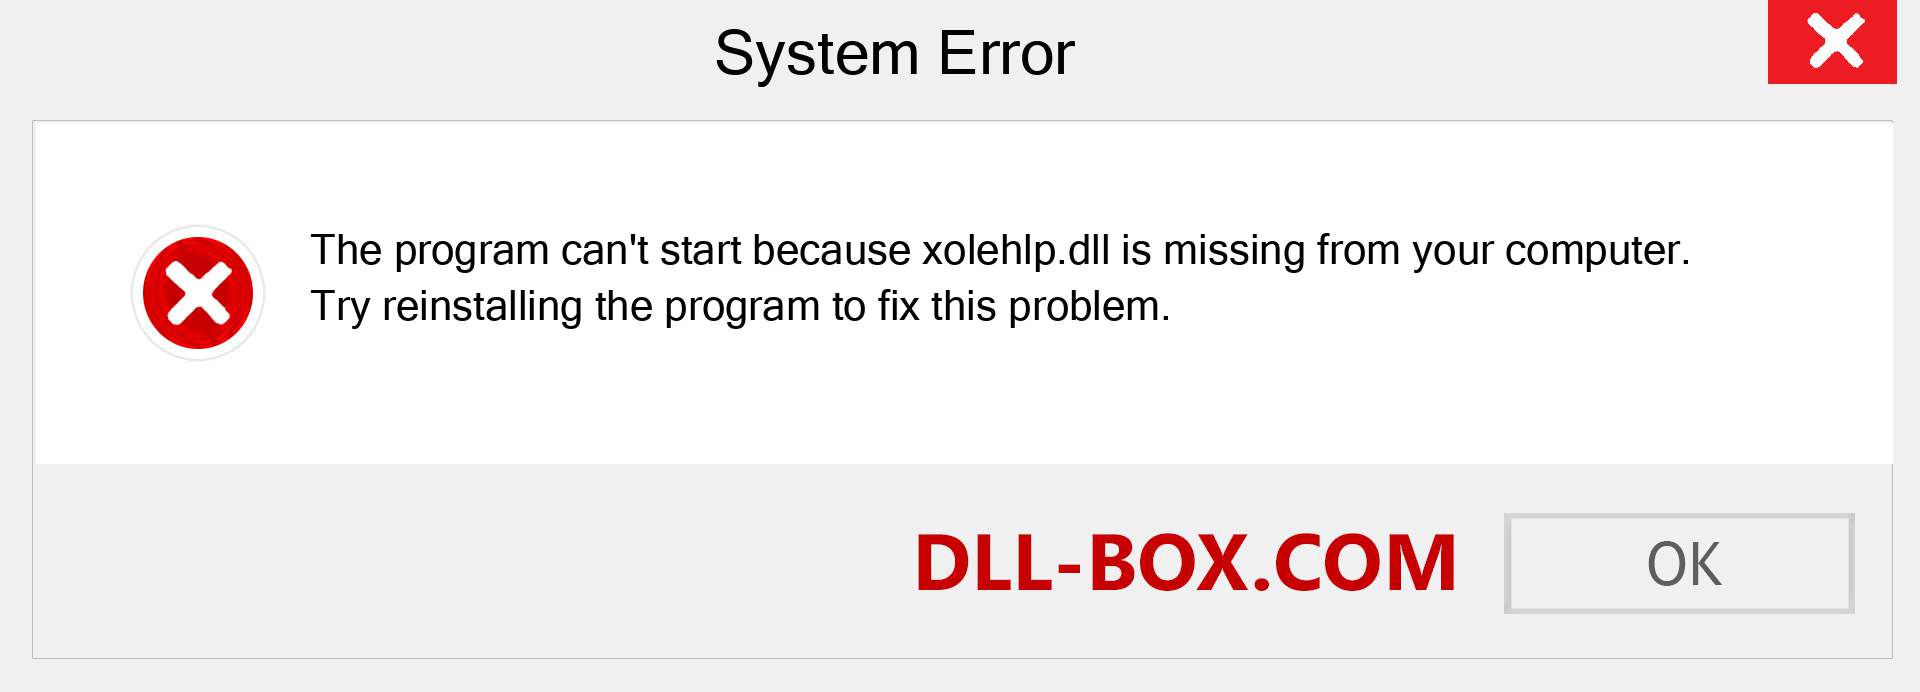  xolehlp.dll file is missing?. Download for Windows 7, 8, 10 - Fix  xolehlp dll Missing Error on Windows, photos, images